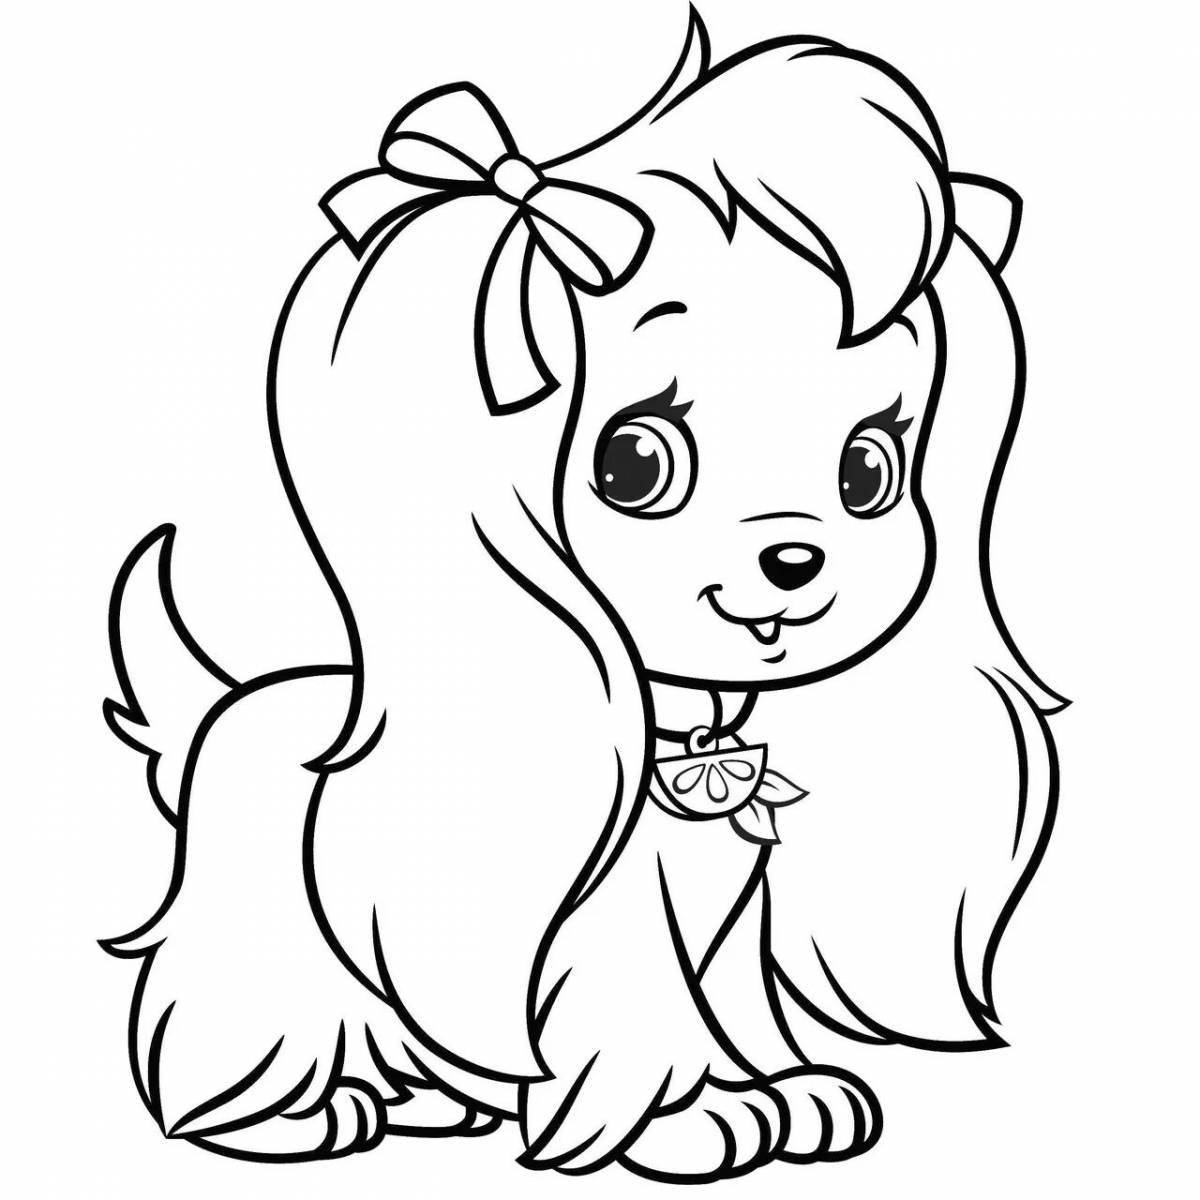 Cute cat and dog coloring pages for kids 3 4 years old